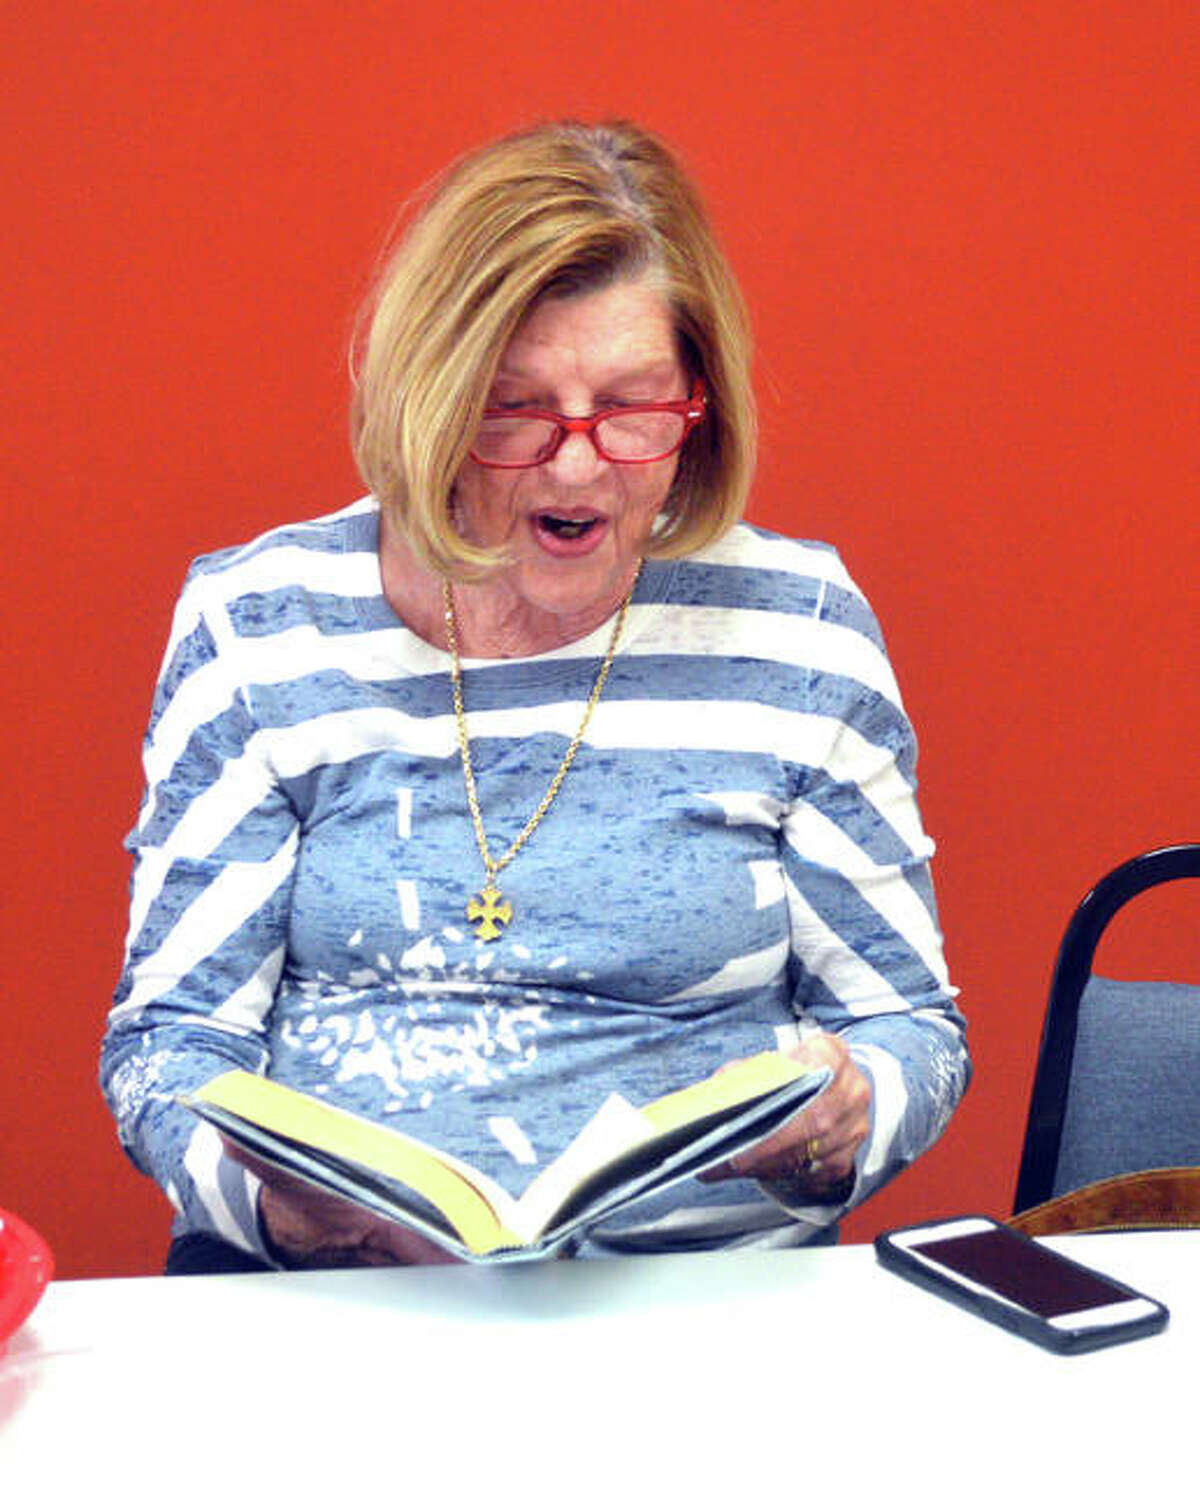 Geni Vuagniaux of Edwardsville discusses “Winter Garden” by Kristin Hannah during Thursday’s meeting of the Afternoon Book Club at Main Street Community Center.